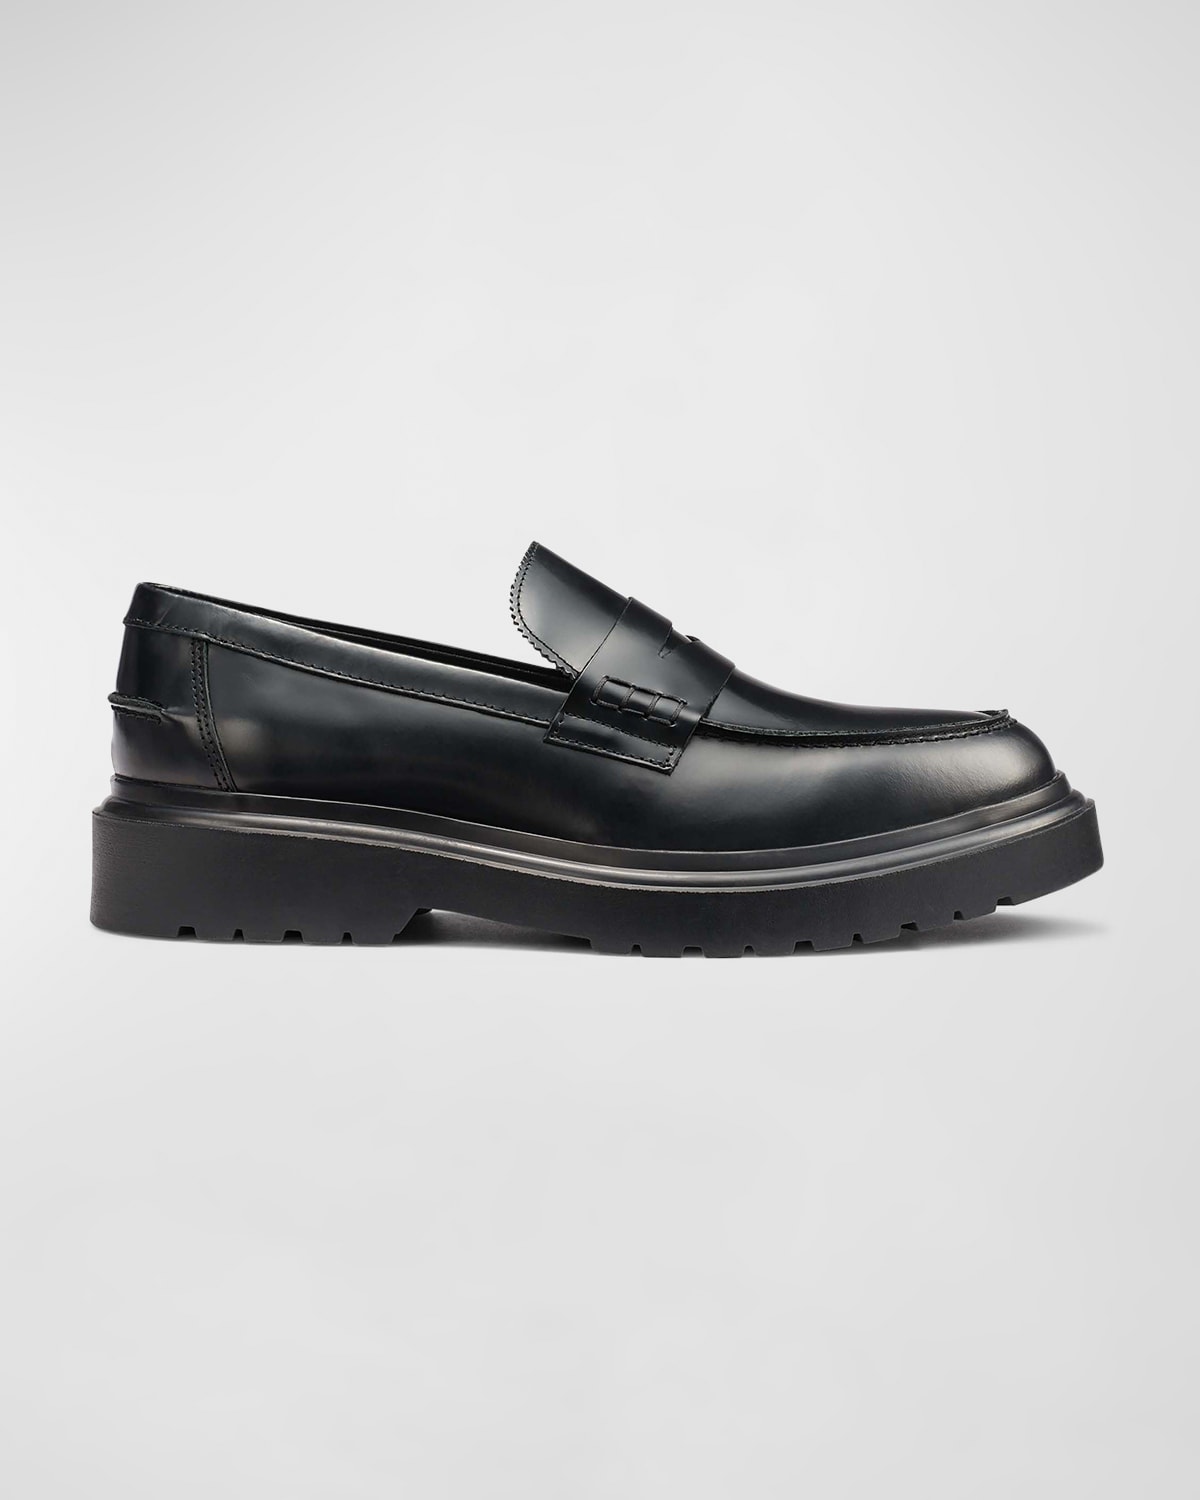 Men's Spazzolato Leather Penny Loafers